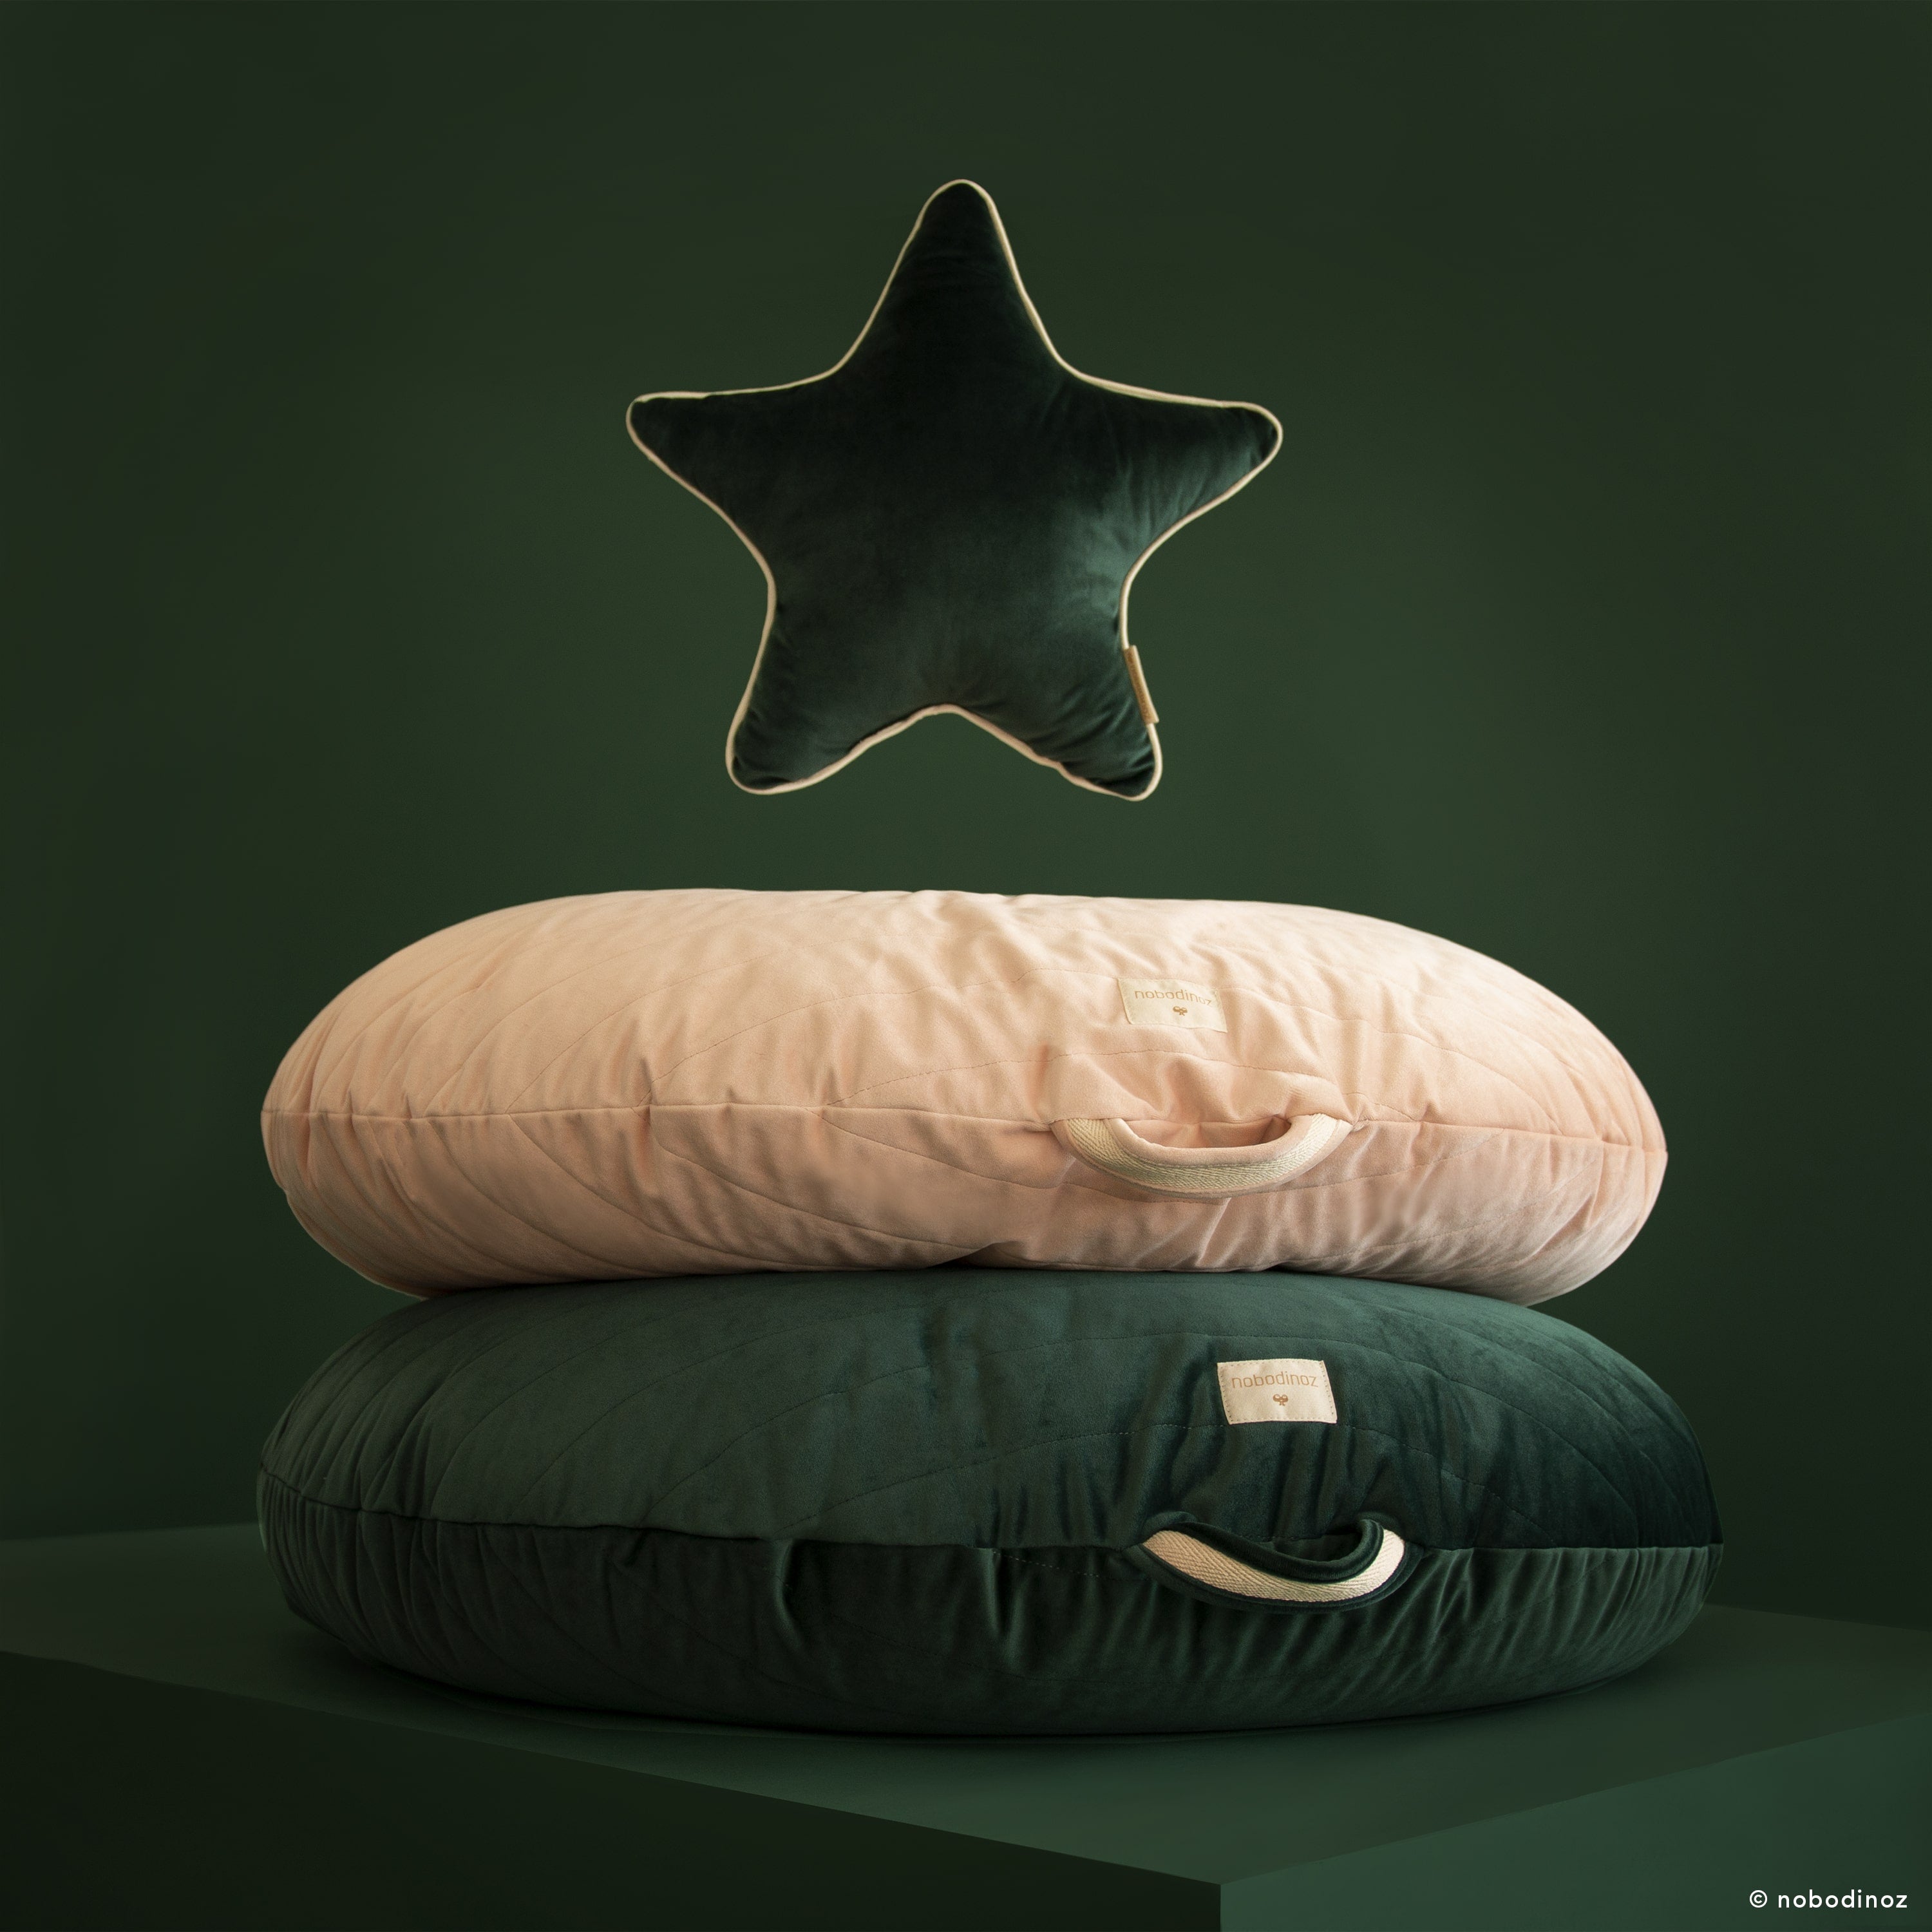 Deer Industries Kids Decor Store Singapore, Nobodinoz Singapore, Kids Decor Store Singapore, Velvet Green Kids Bean Bag with removable covers